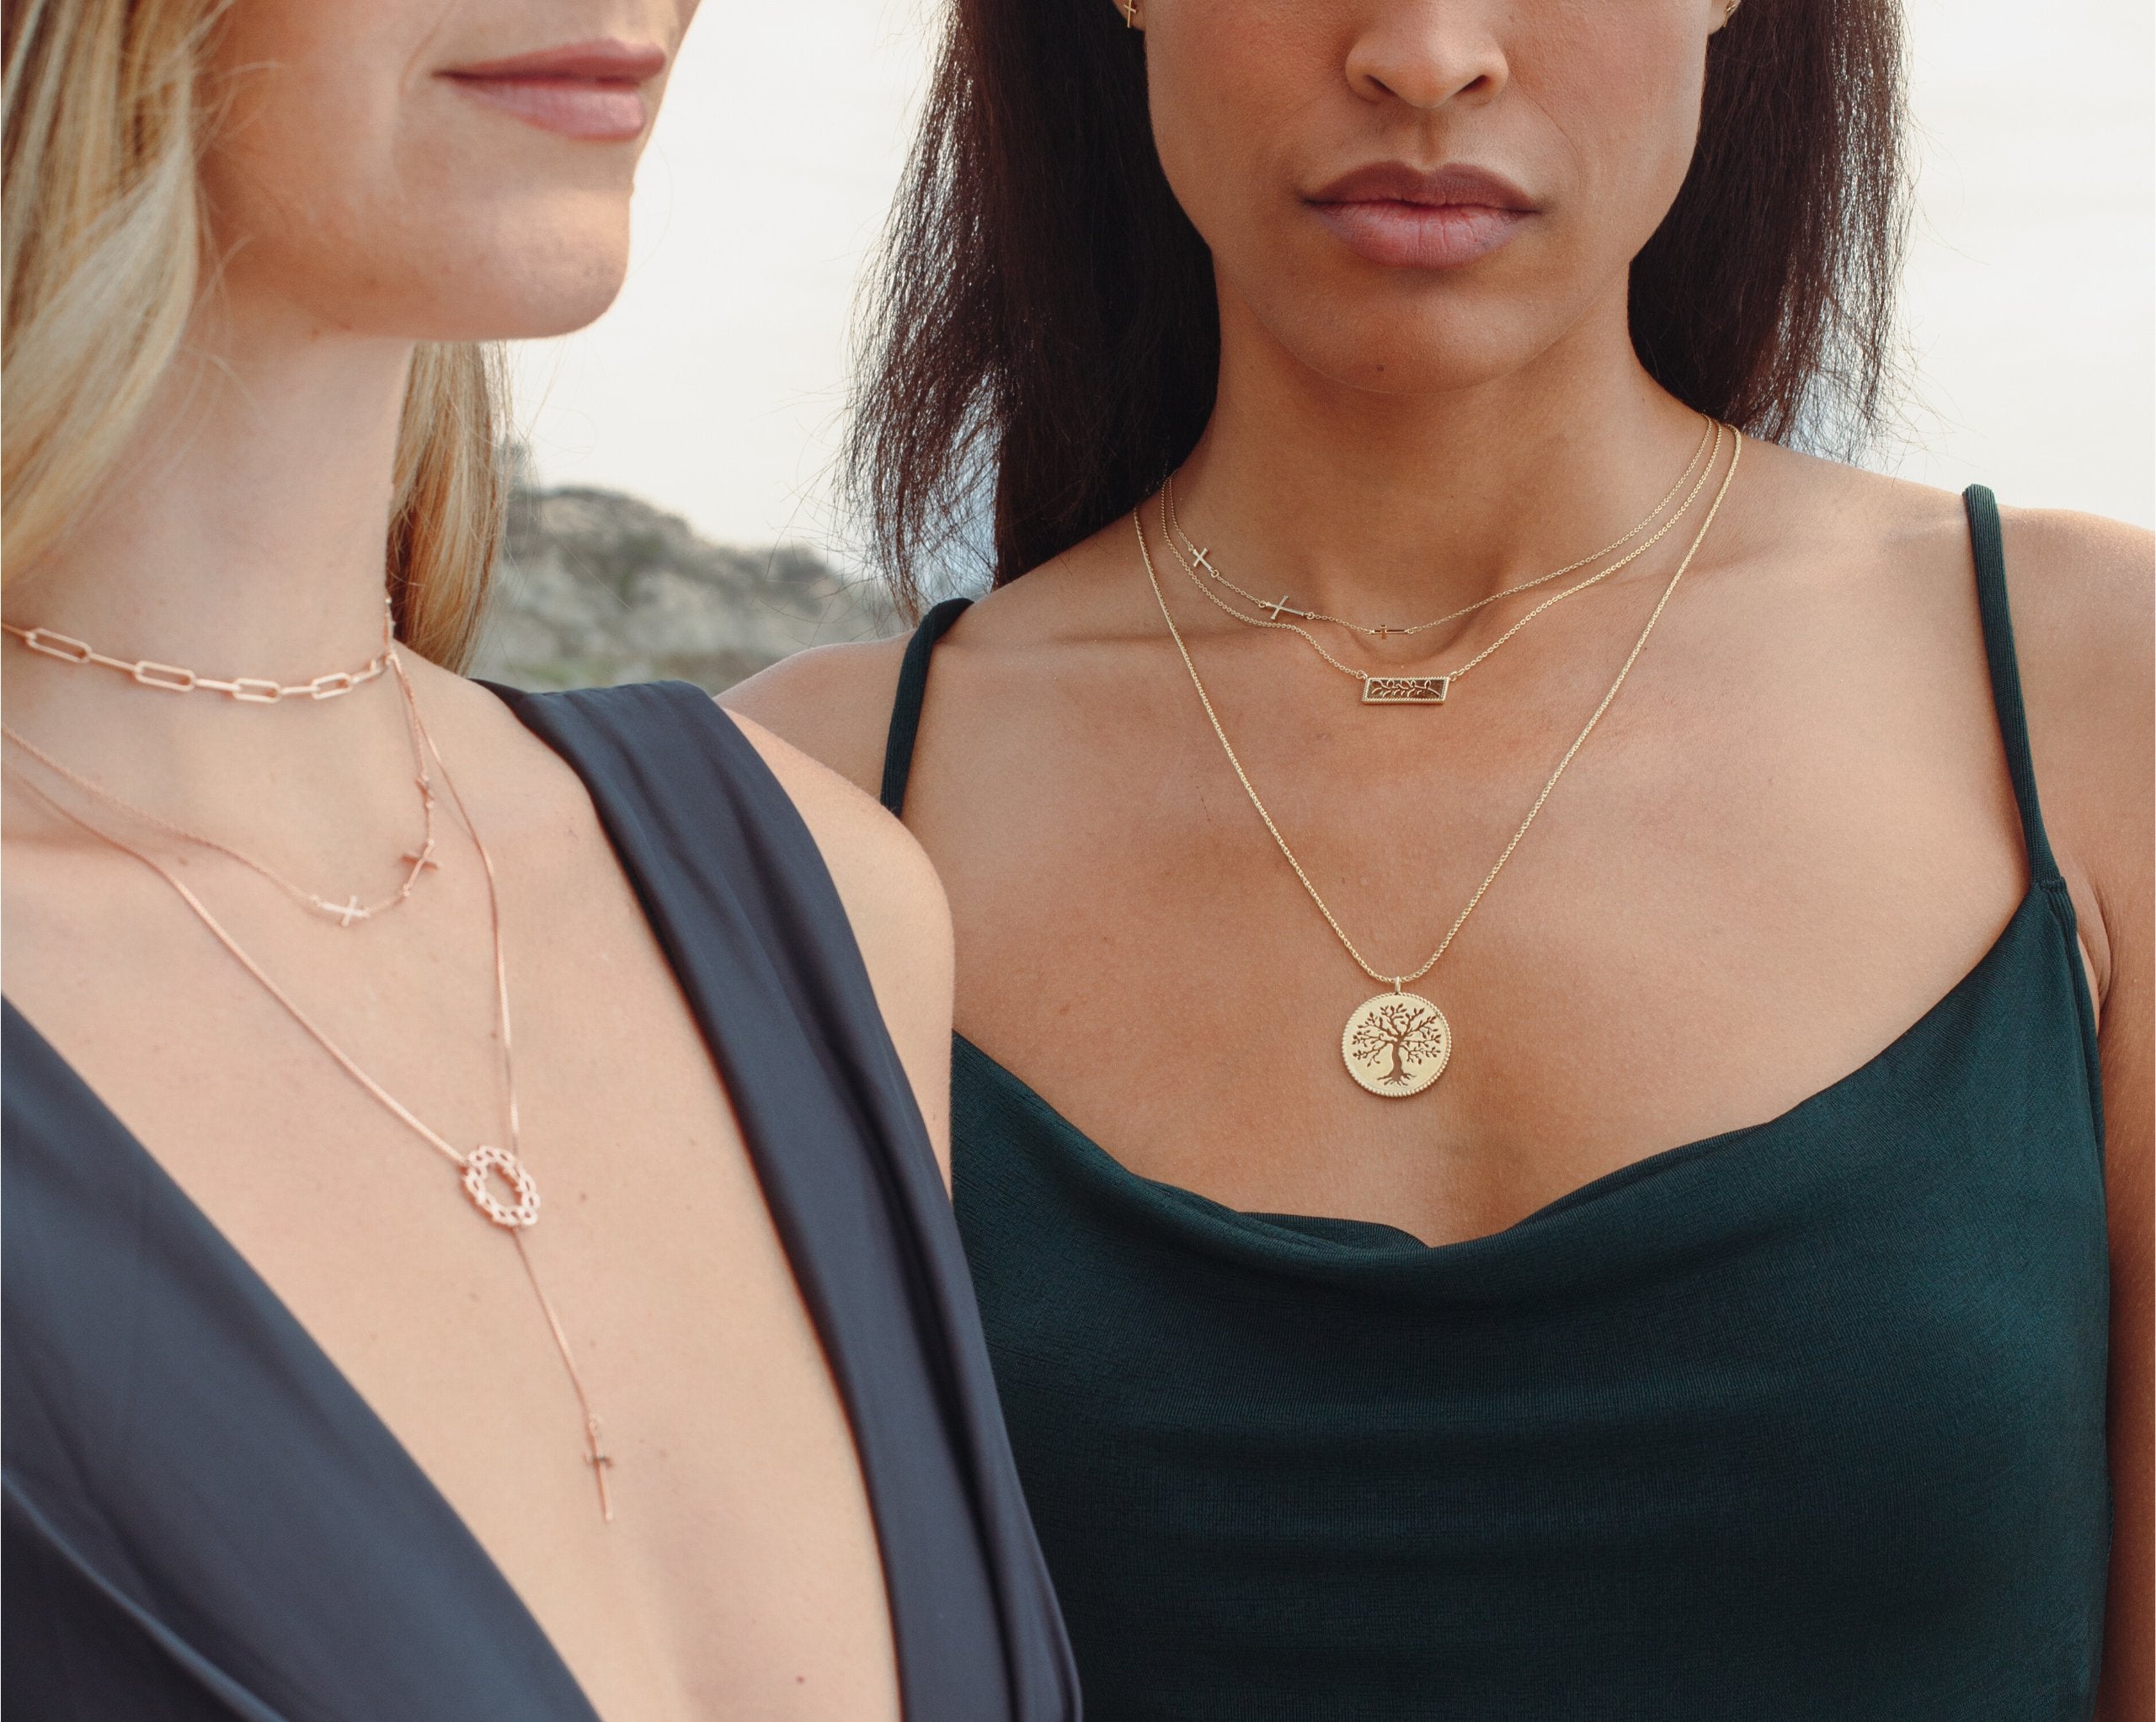 Women wearing gold vermeil Christian necklaces. Crown of Thorns necklace, Olive Tree and Branch Necklaces and Cross Necklaces on chain